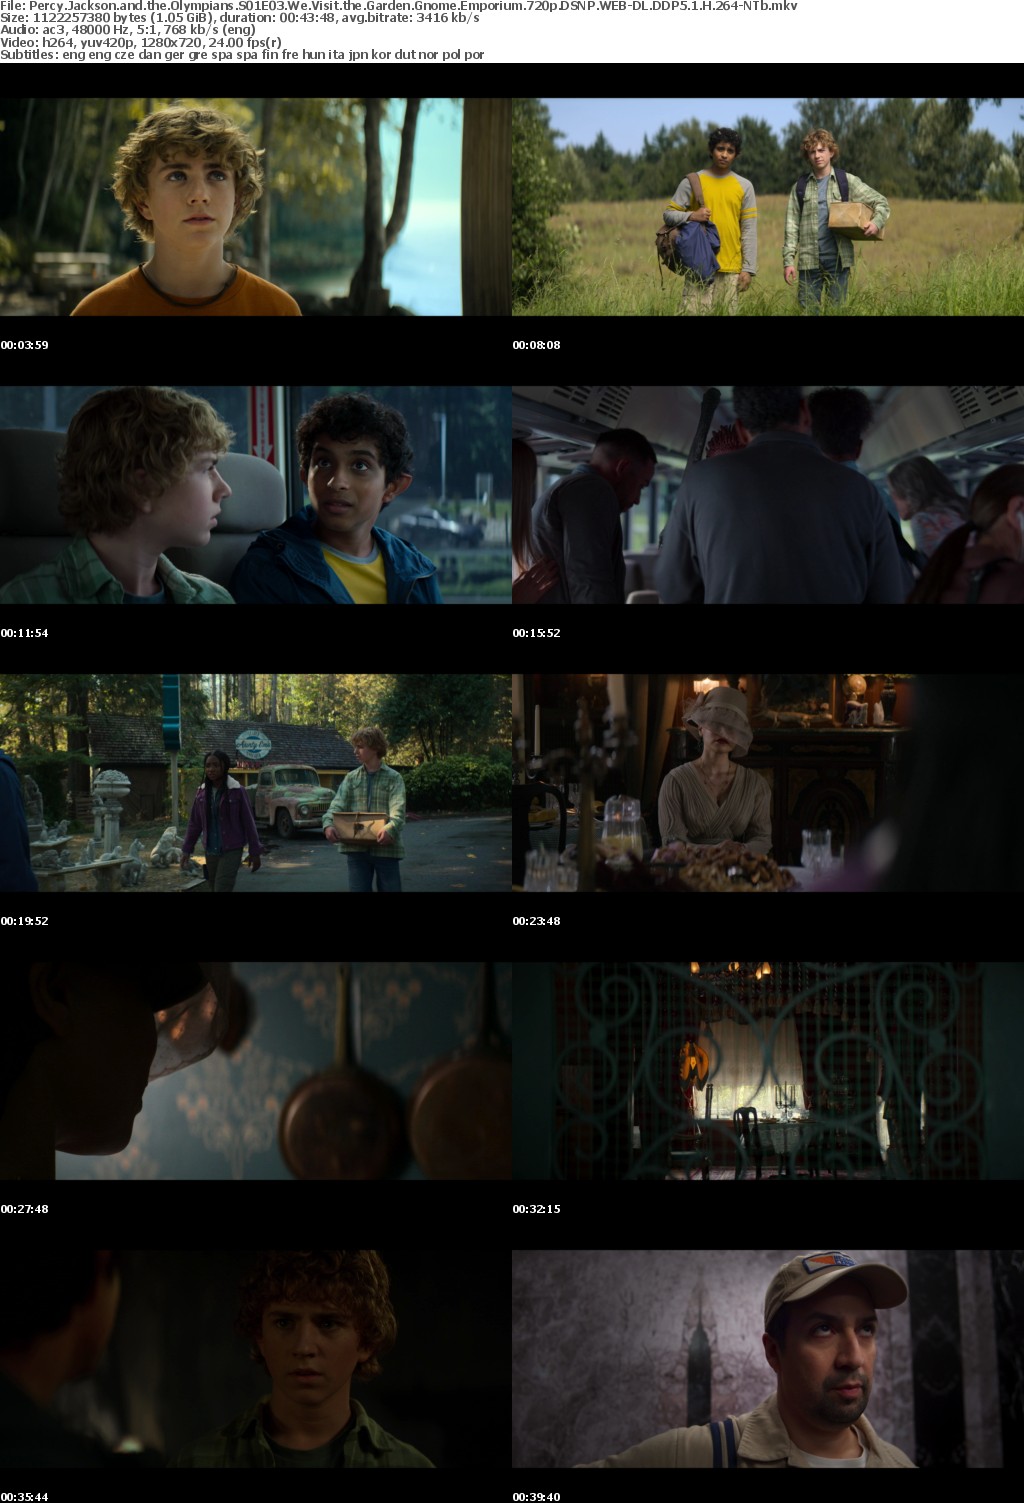 Percy Jackson and the Olympians S01E03 We Visit the Garden Gnome Emporium 720p DSNP WEB-DL DDP5 1 H 264-NTb